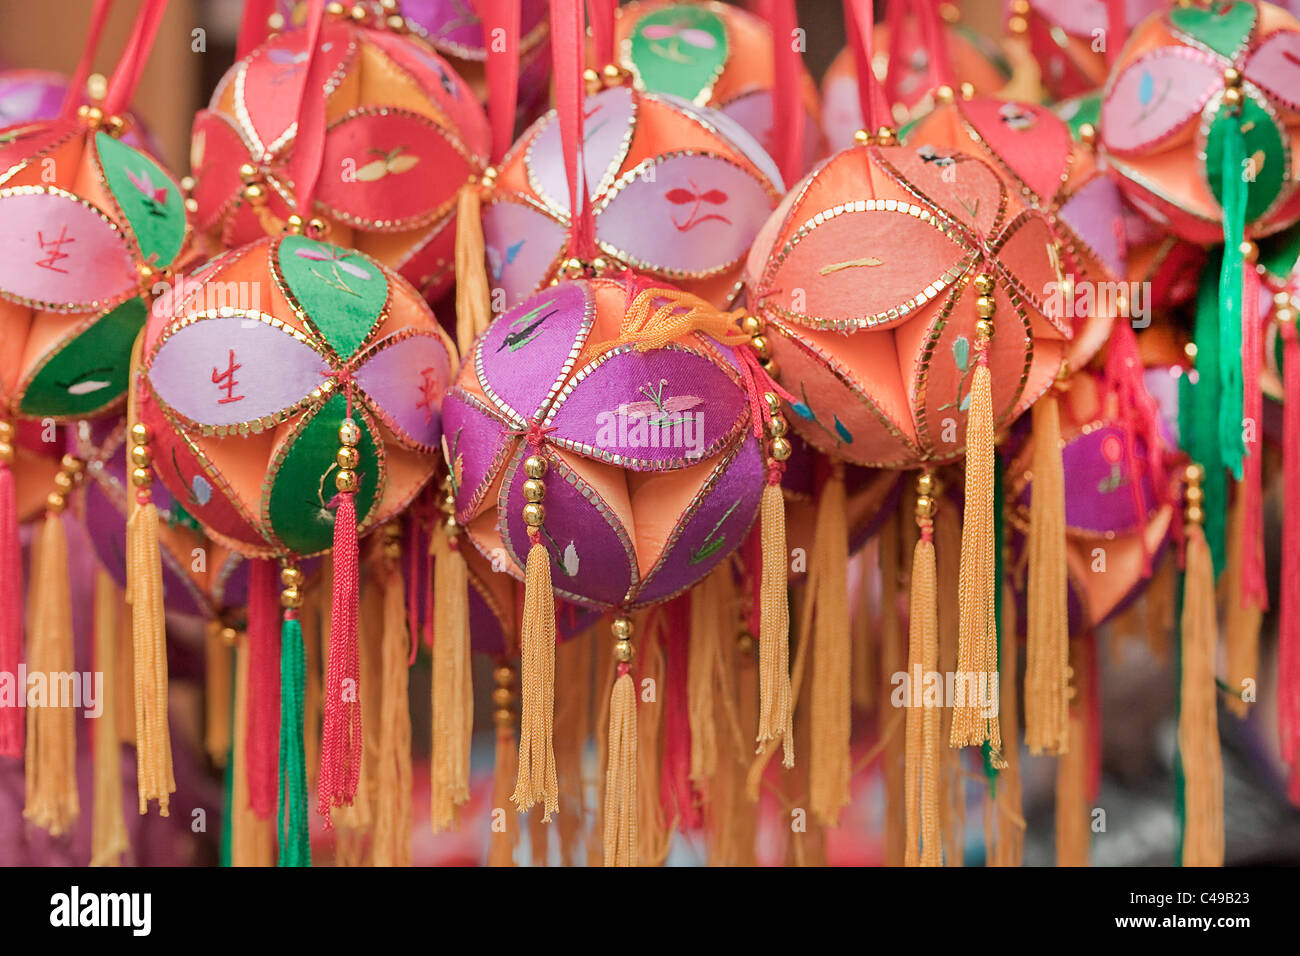 Close up of colorful souvenirs in Jinli street market, Chengdu, Sichuan Province, China Stock Photo